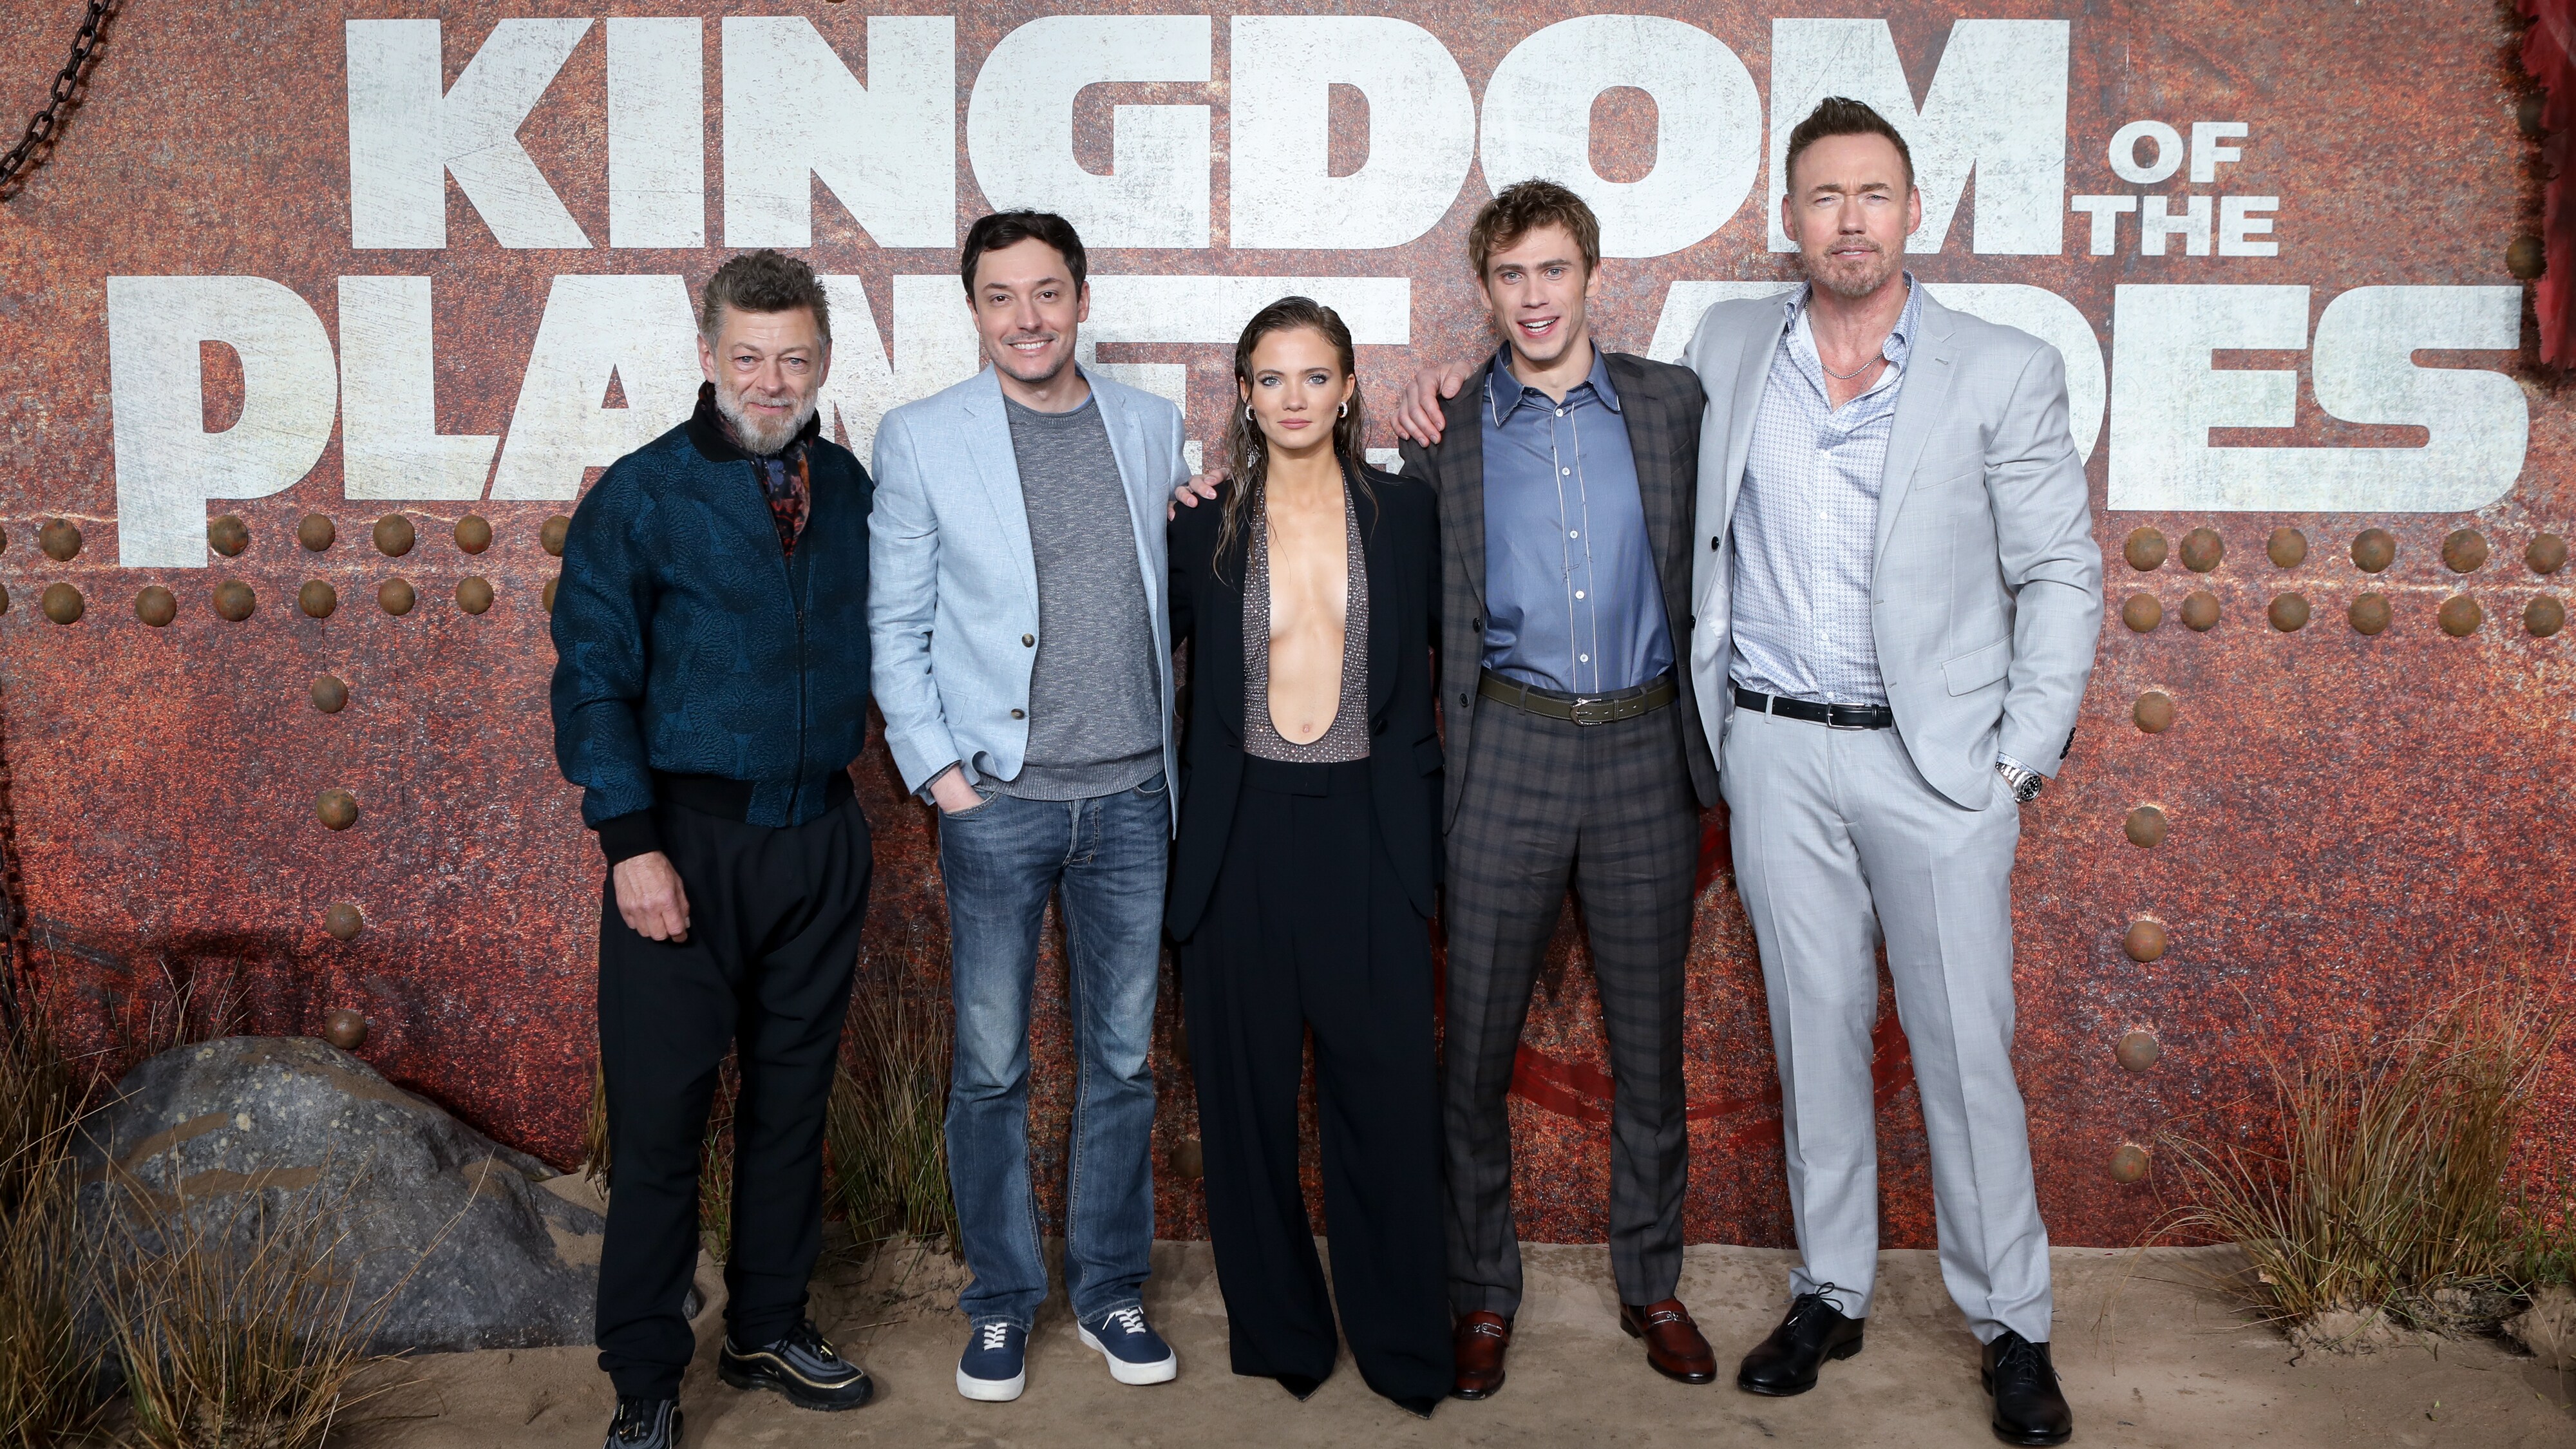 CAST AND FILMMAKERS FROM “KINGDOM OF THE PLANET OF THE APES,” INCLUDING STARS OWEN TEAGUE, FREYA ALLAN, KEVIN DURAND, DIRECTOR/PRODUCER WES BALL, AND STAR OF THE ORIGINAL TRILOGY ANDY SERKIS  ATTEND SPECIAL SCREENING OF FILM FOOTAGE AT LONDON’S BFI IMAX® 